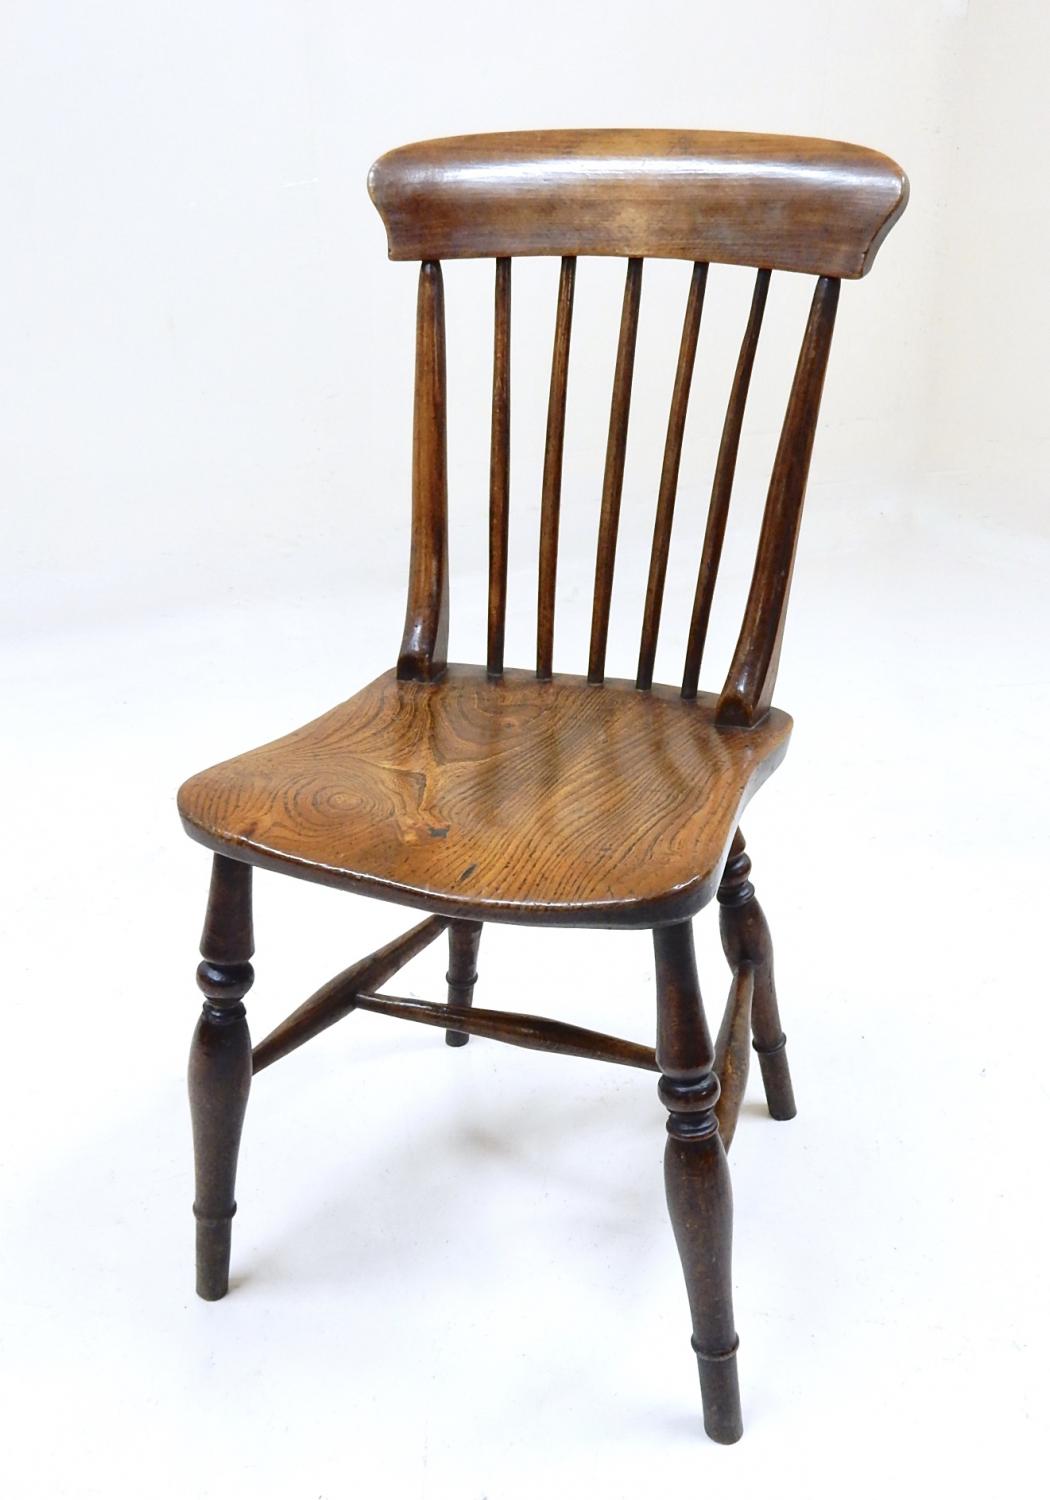 Antique Windsor Dining Chairs in Tables and Chairs